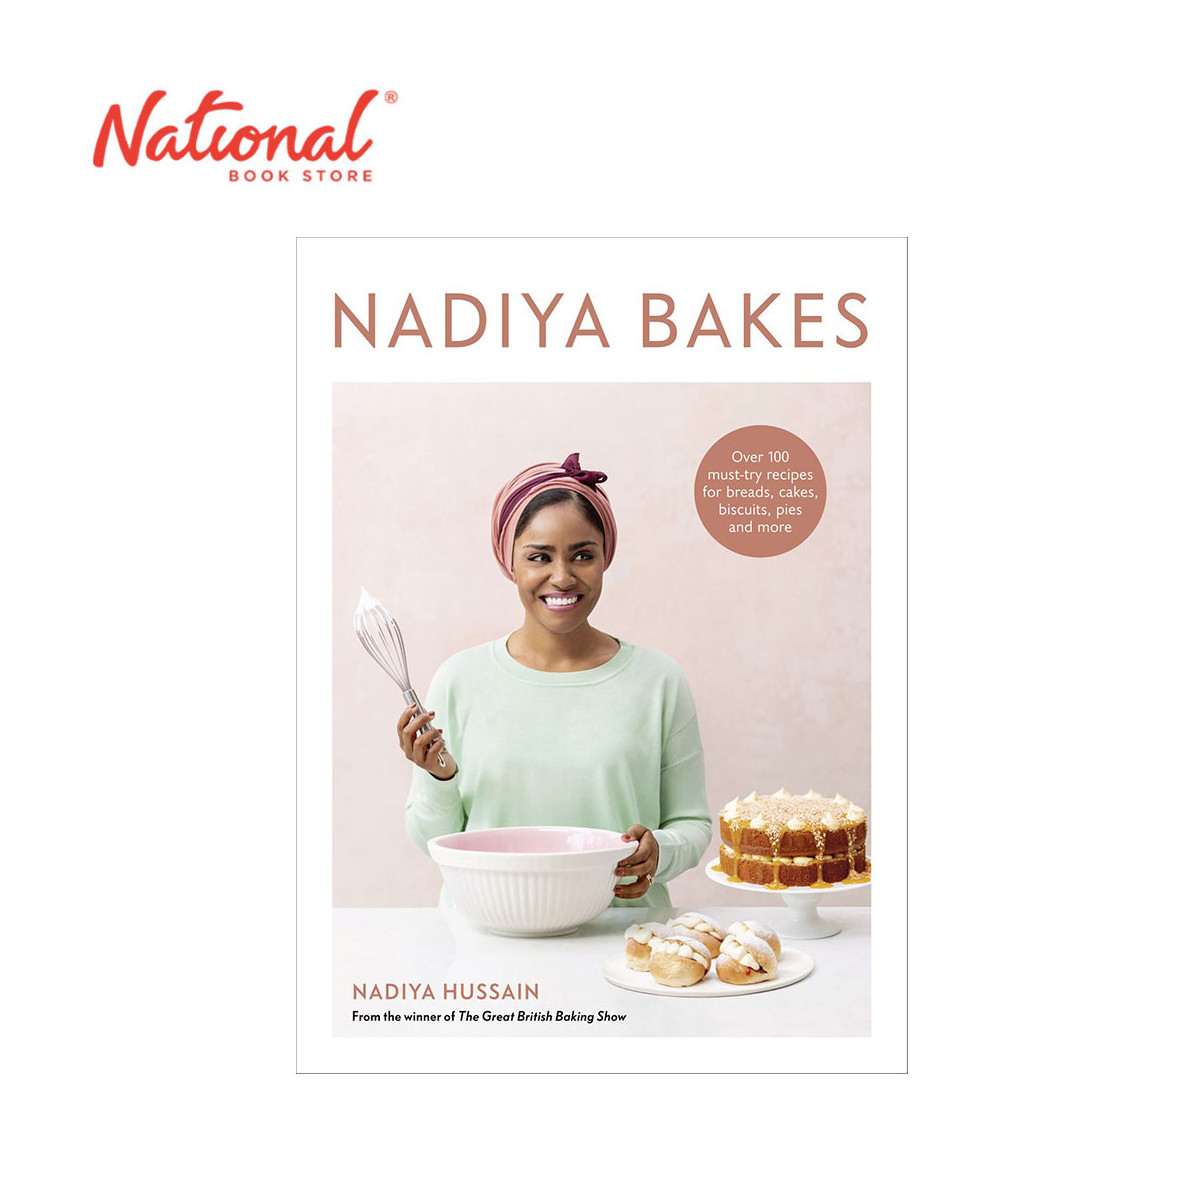 Nadiya Bakes: Over 100 Must-Try Recipes for Breads, Cakes, Biscuits, Pies and More by Nadiya Hussain